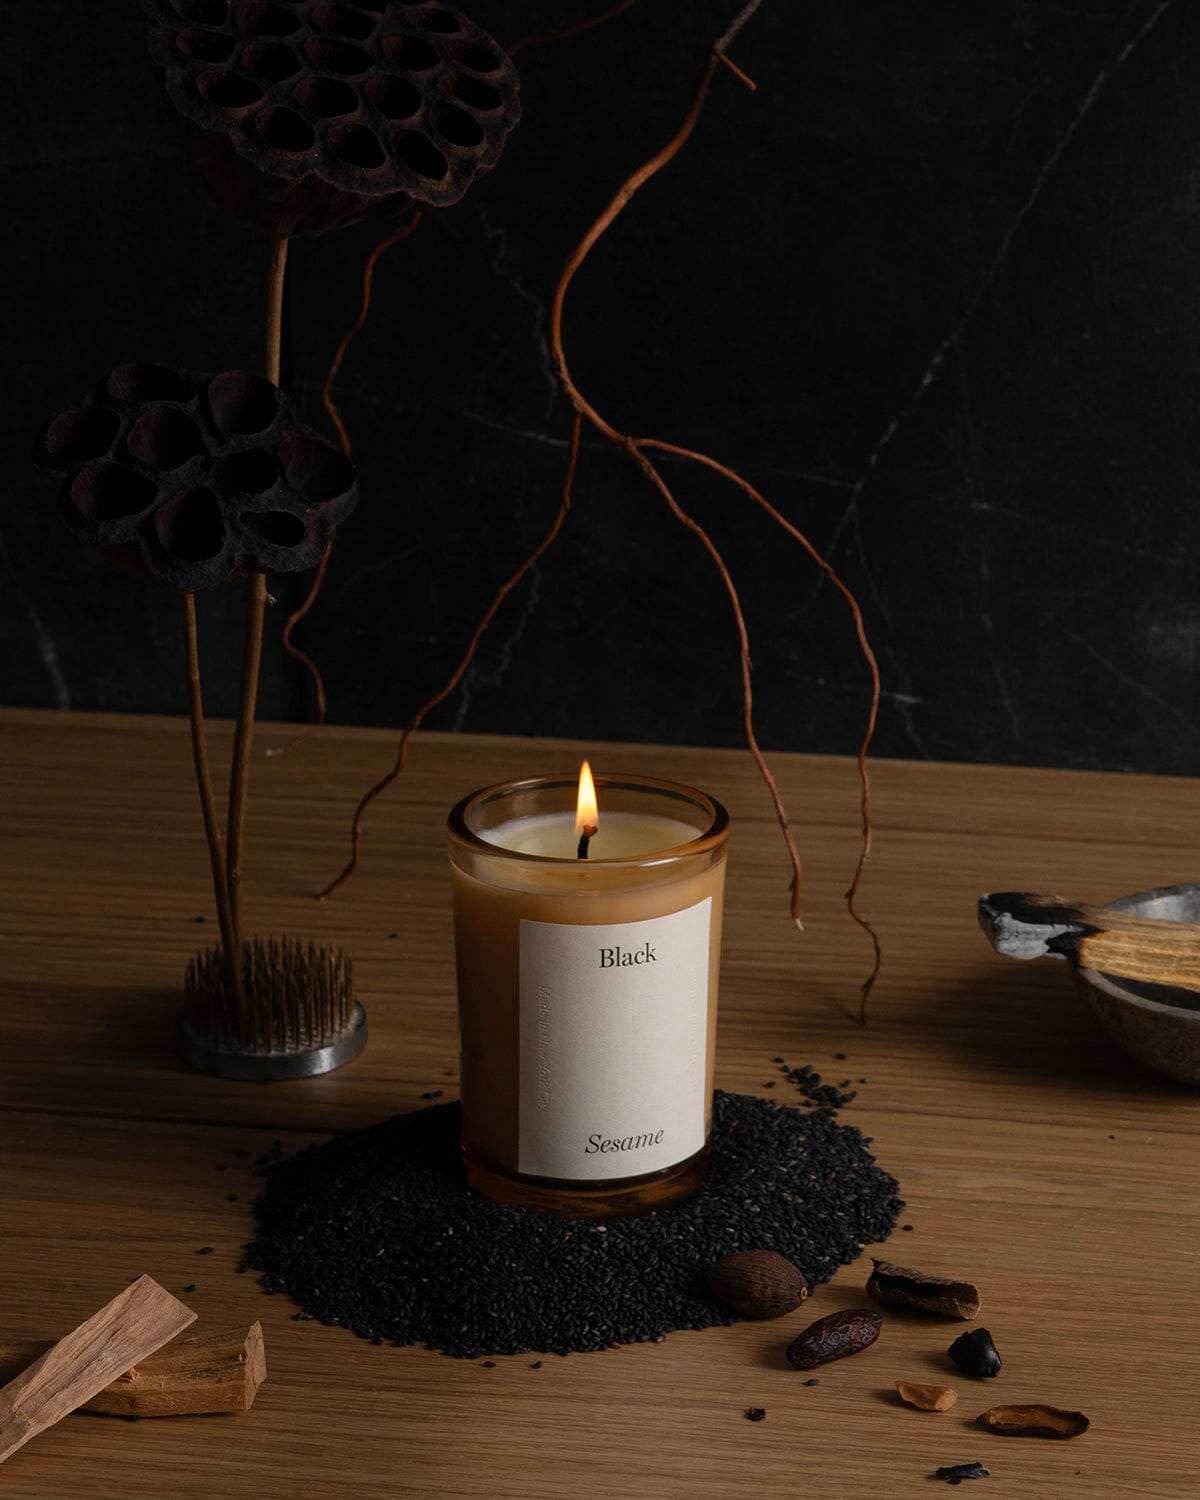 March: Limited Edition Black Sesame Candle